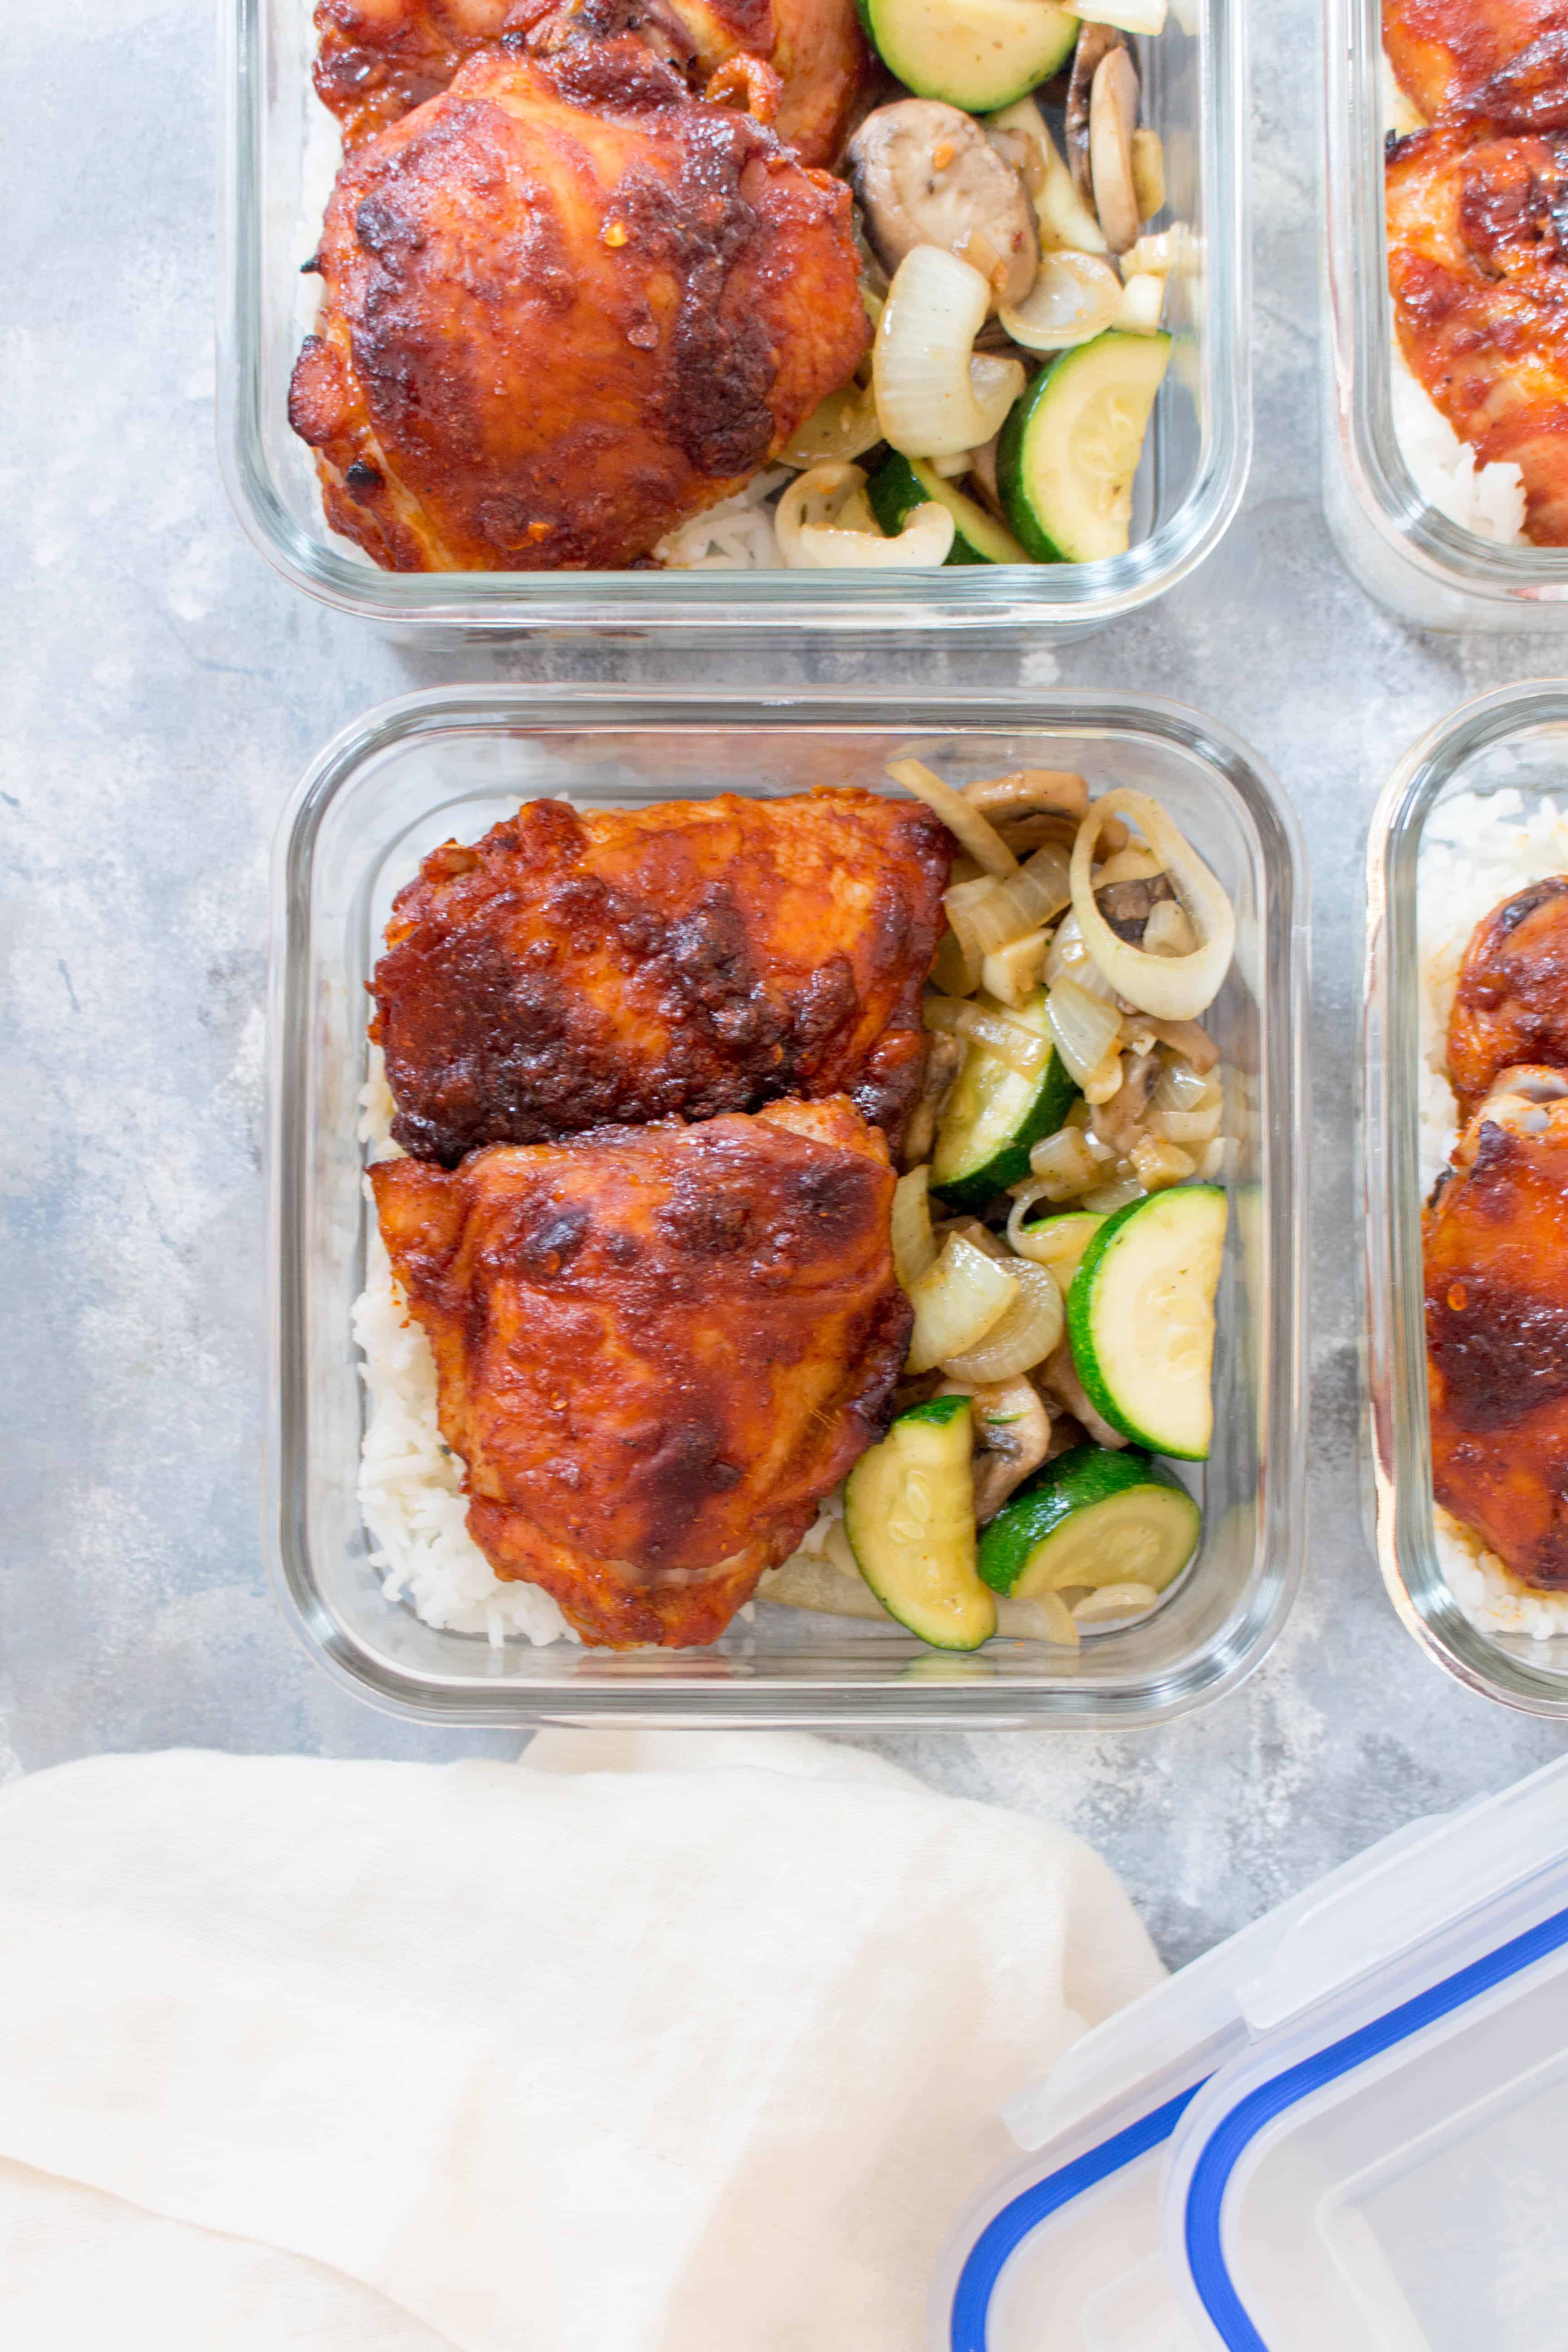 Looking for a lunch with a bit of a kick? This Spicy Korean Chicken Meal Prep is prefect for you! The chicken is oven baked so they're wonderfully juicy and tender on the inside while still being crispy on the outside!